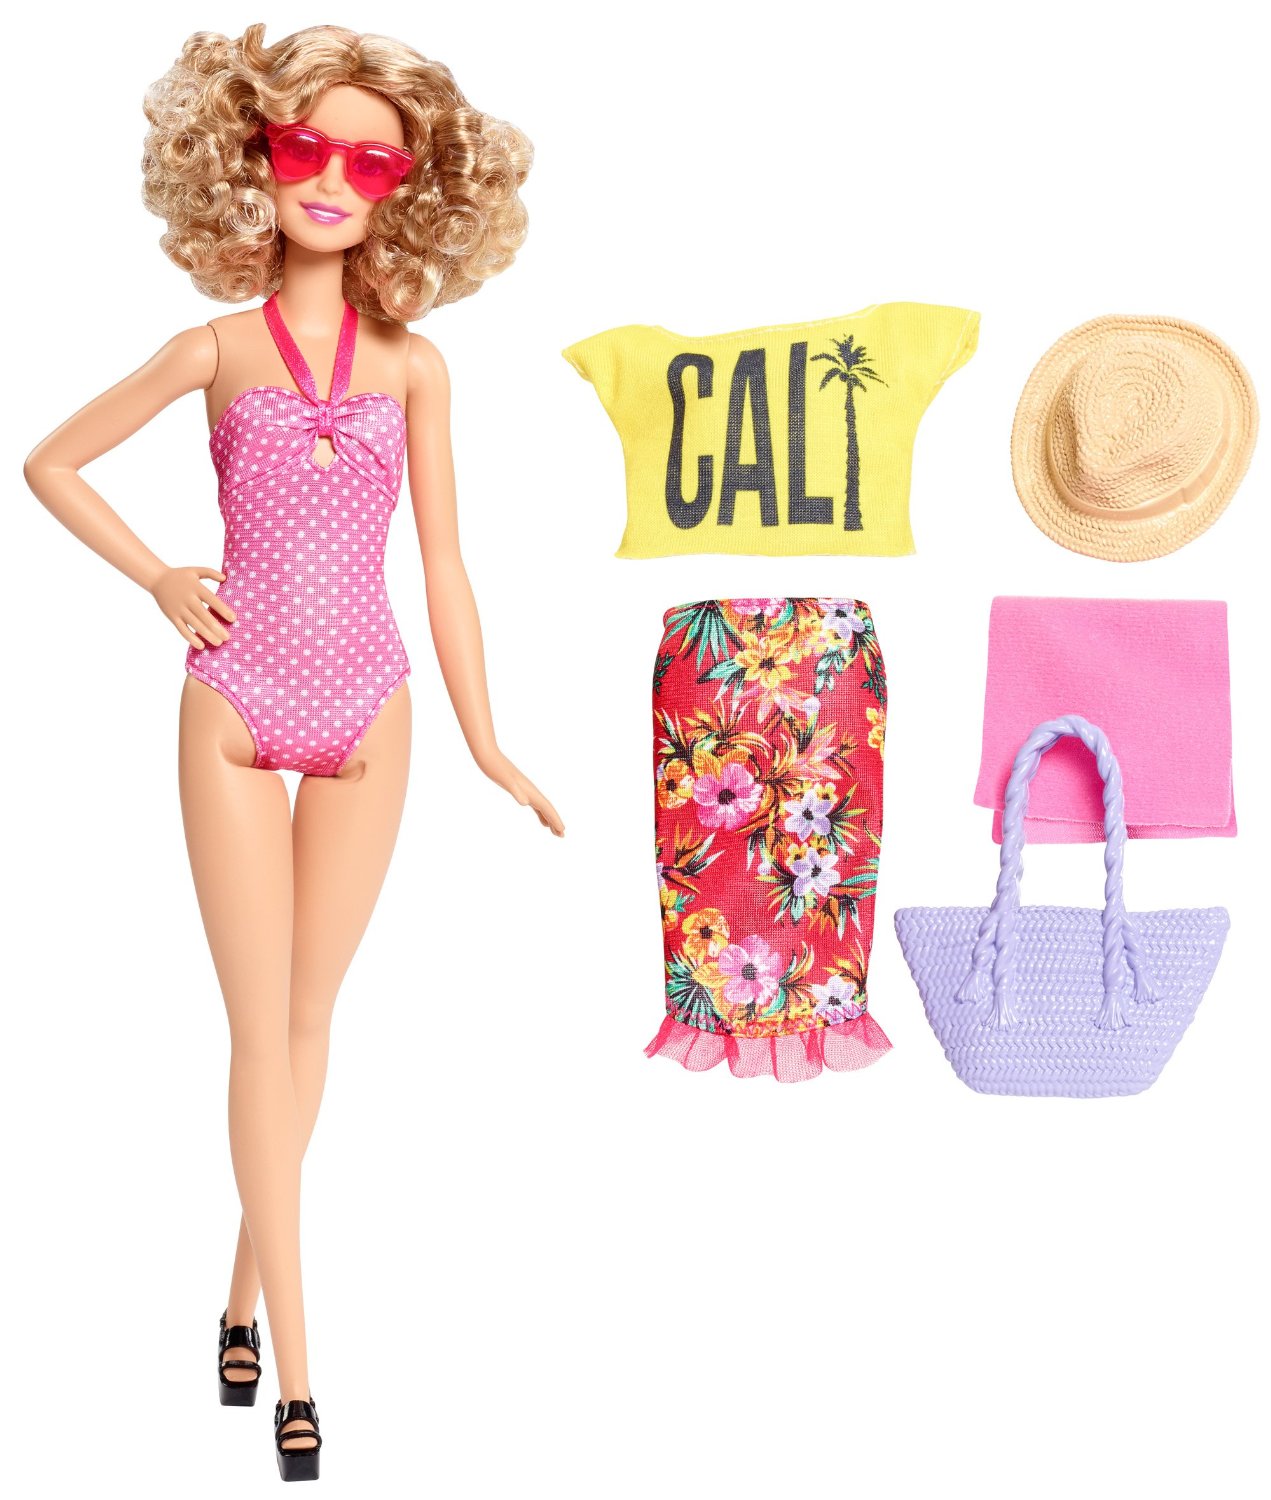 Barbie Glam Vacation Doll, Pink Polka Dot – Just $6.91!